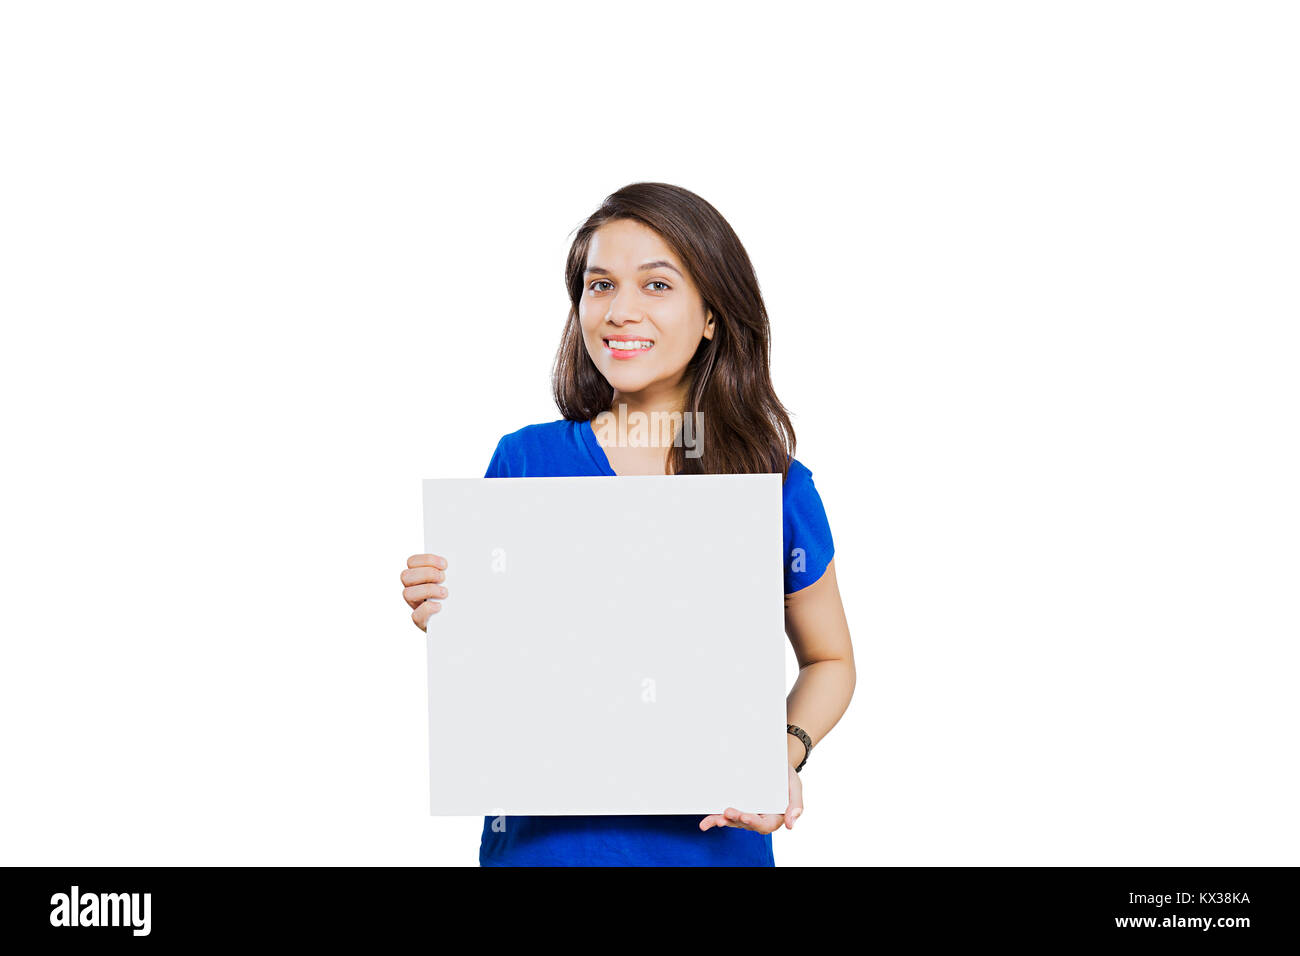 1 Indian Young Woman College Student Showing White Board Stock Photo